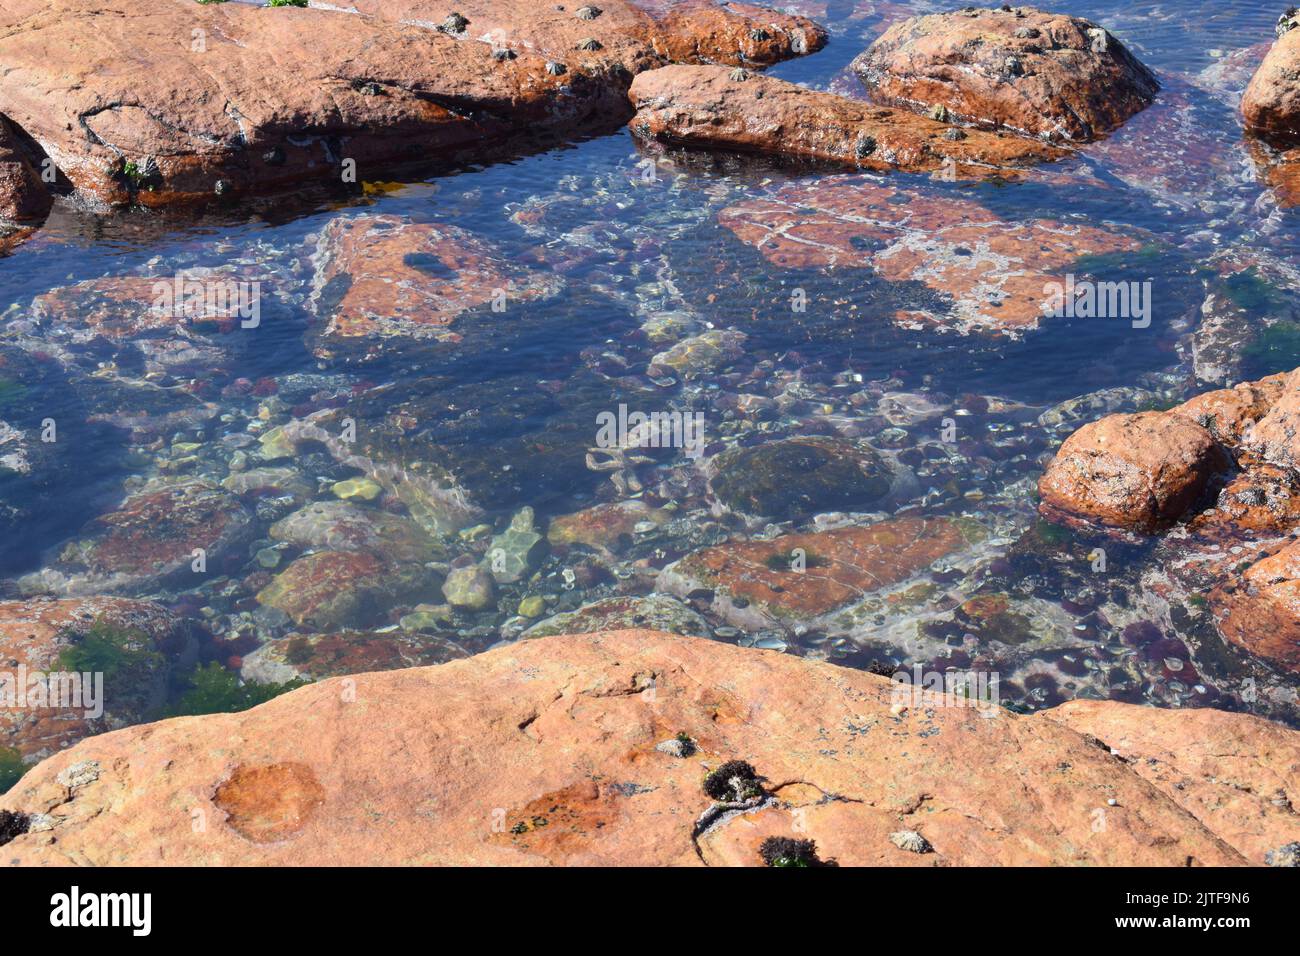 Ocean pond between rocks with inconspicuous central starfish camouflaged amongst the rocks and sand. Stock Photo